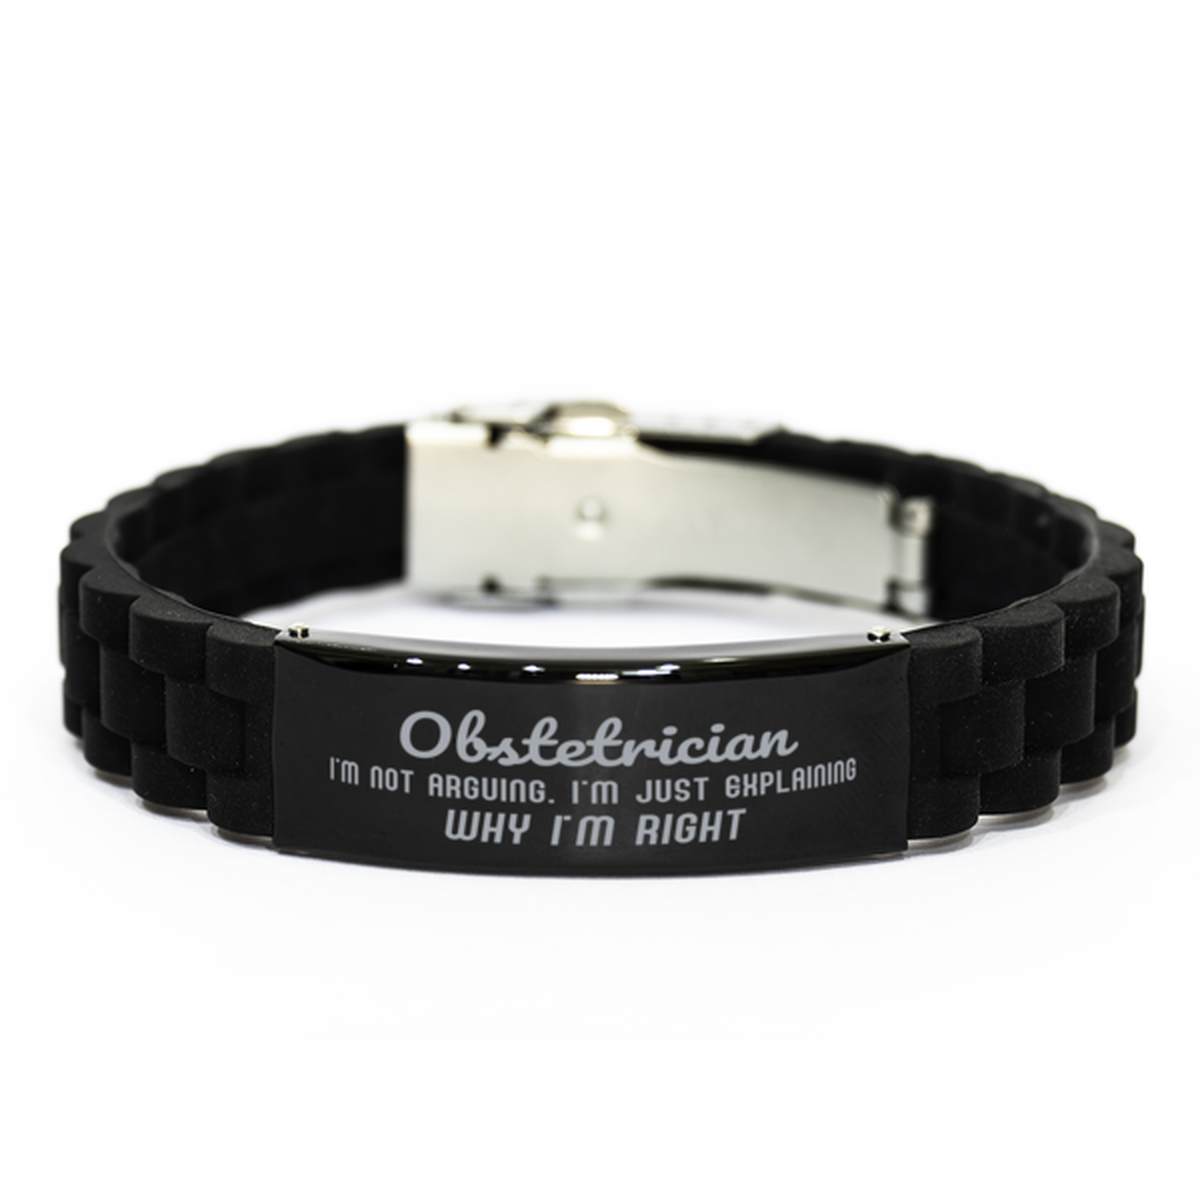 Obstetrician I'm not Arguing. I'm Just Explaining Why I'm RIGHT Black Glidelock Clasp Bracelet, Funny Saying Quote Obstetrician Gifts For Obstetrician Graduation Birthday Christmas Gifts for Men Women Coworker